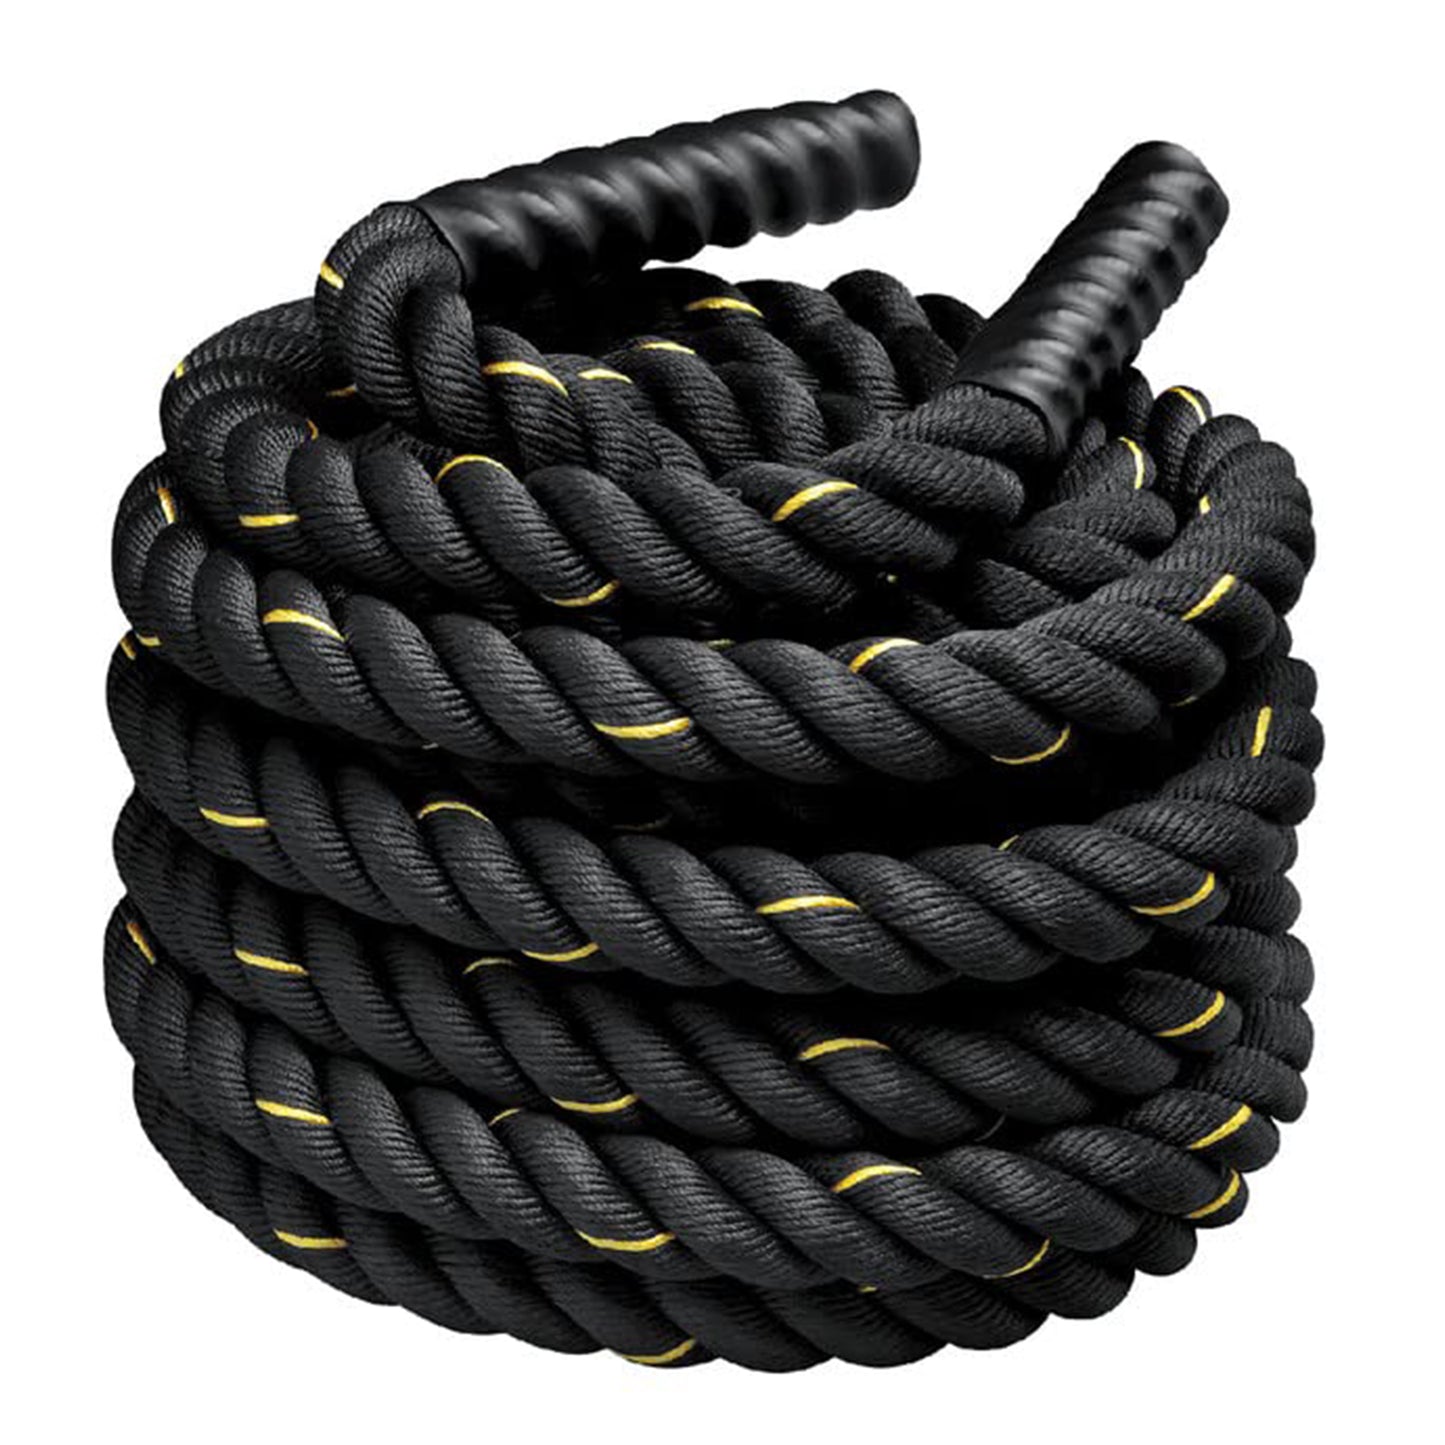 Fit Fusion Polyester Flexible Black Yellow Diameter 1.5-Inch Heavy Battle Rope for Gym and Home Workouts (Combo of Battle Rope,Anchor Strap Wall Mount)